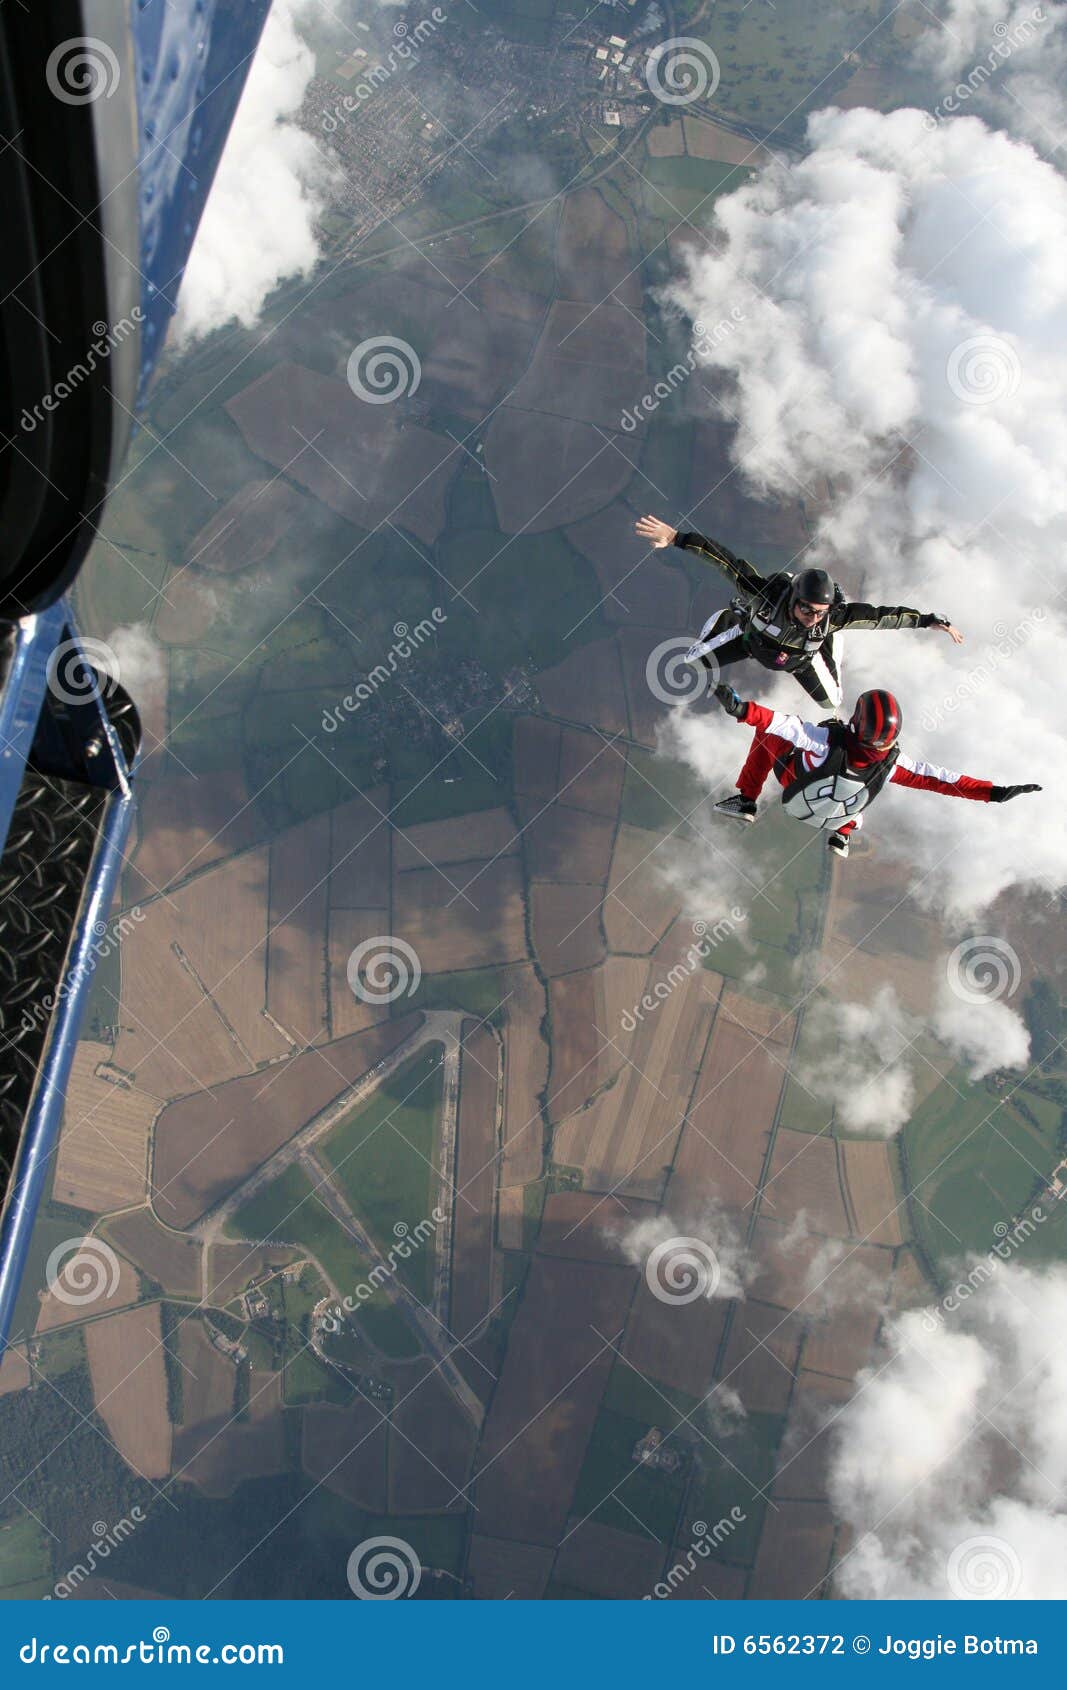 two skydivers exit a plane